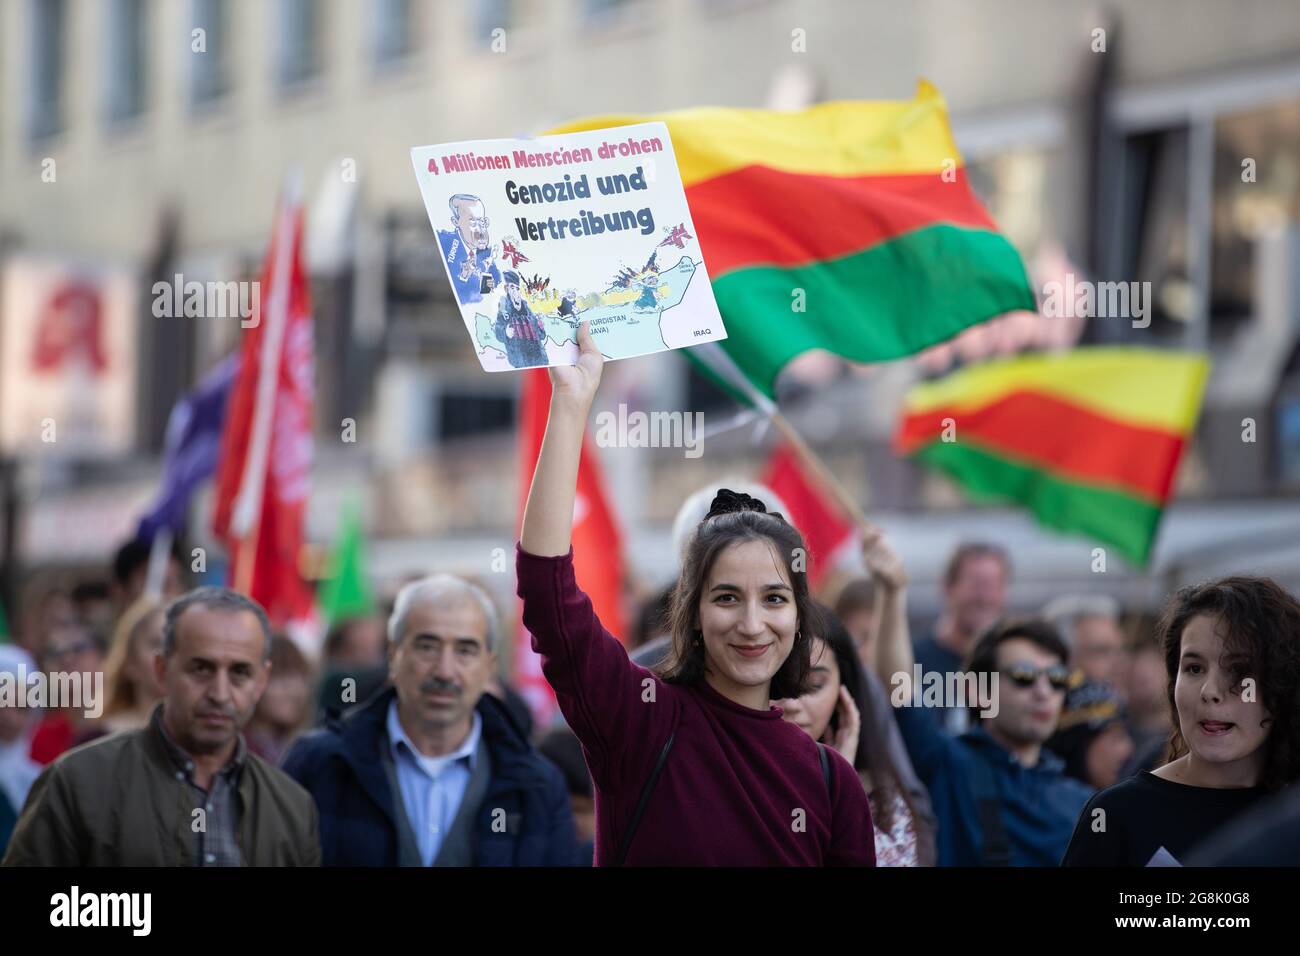 Munich, Germany. 26th Oct, 2019. Sign reading ' 4 Million people thretened of genocide and displacement '. On 26. October 2016 around 800 people joined a demonstration in solidarity of the Kurdish people in Syria, who are being attacked by the Turkish military. (Photo by Alexander Pohl/Sipa USA) Credit: Sipa USA/Alamy Live News Stock Photo